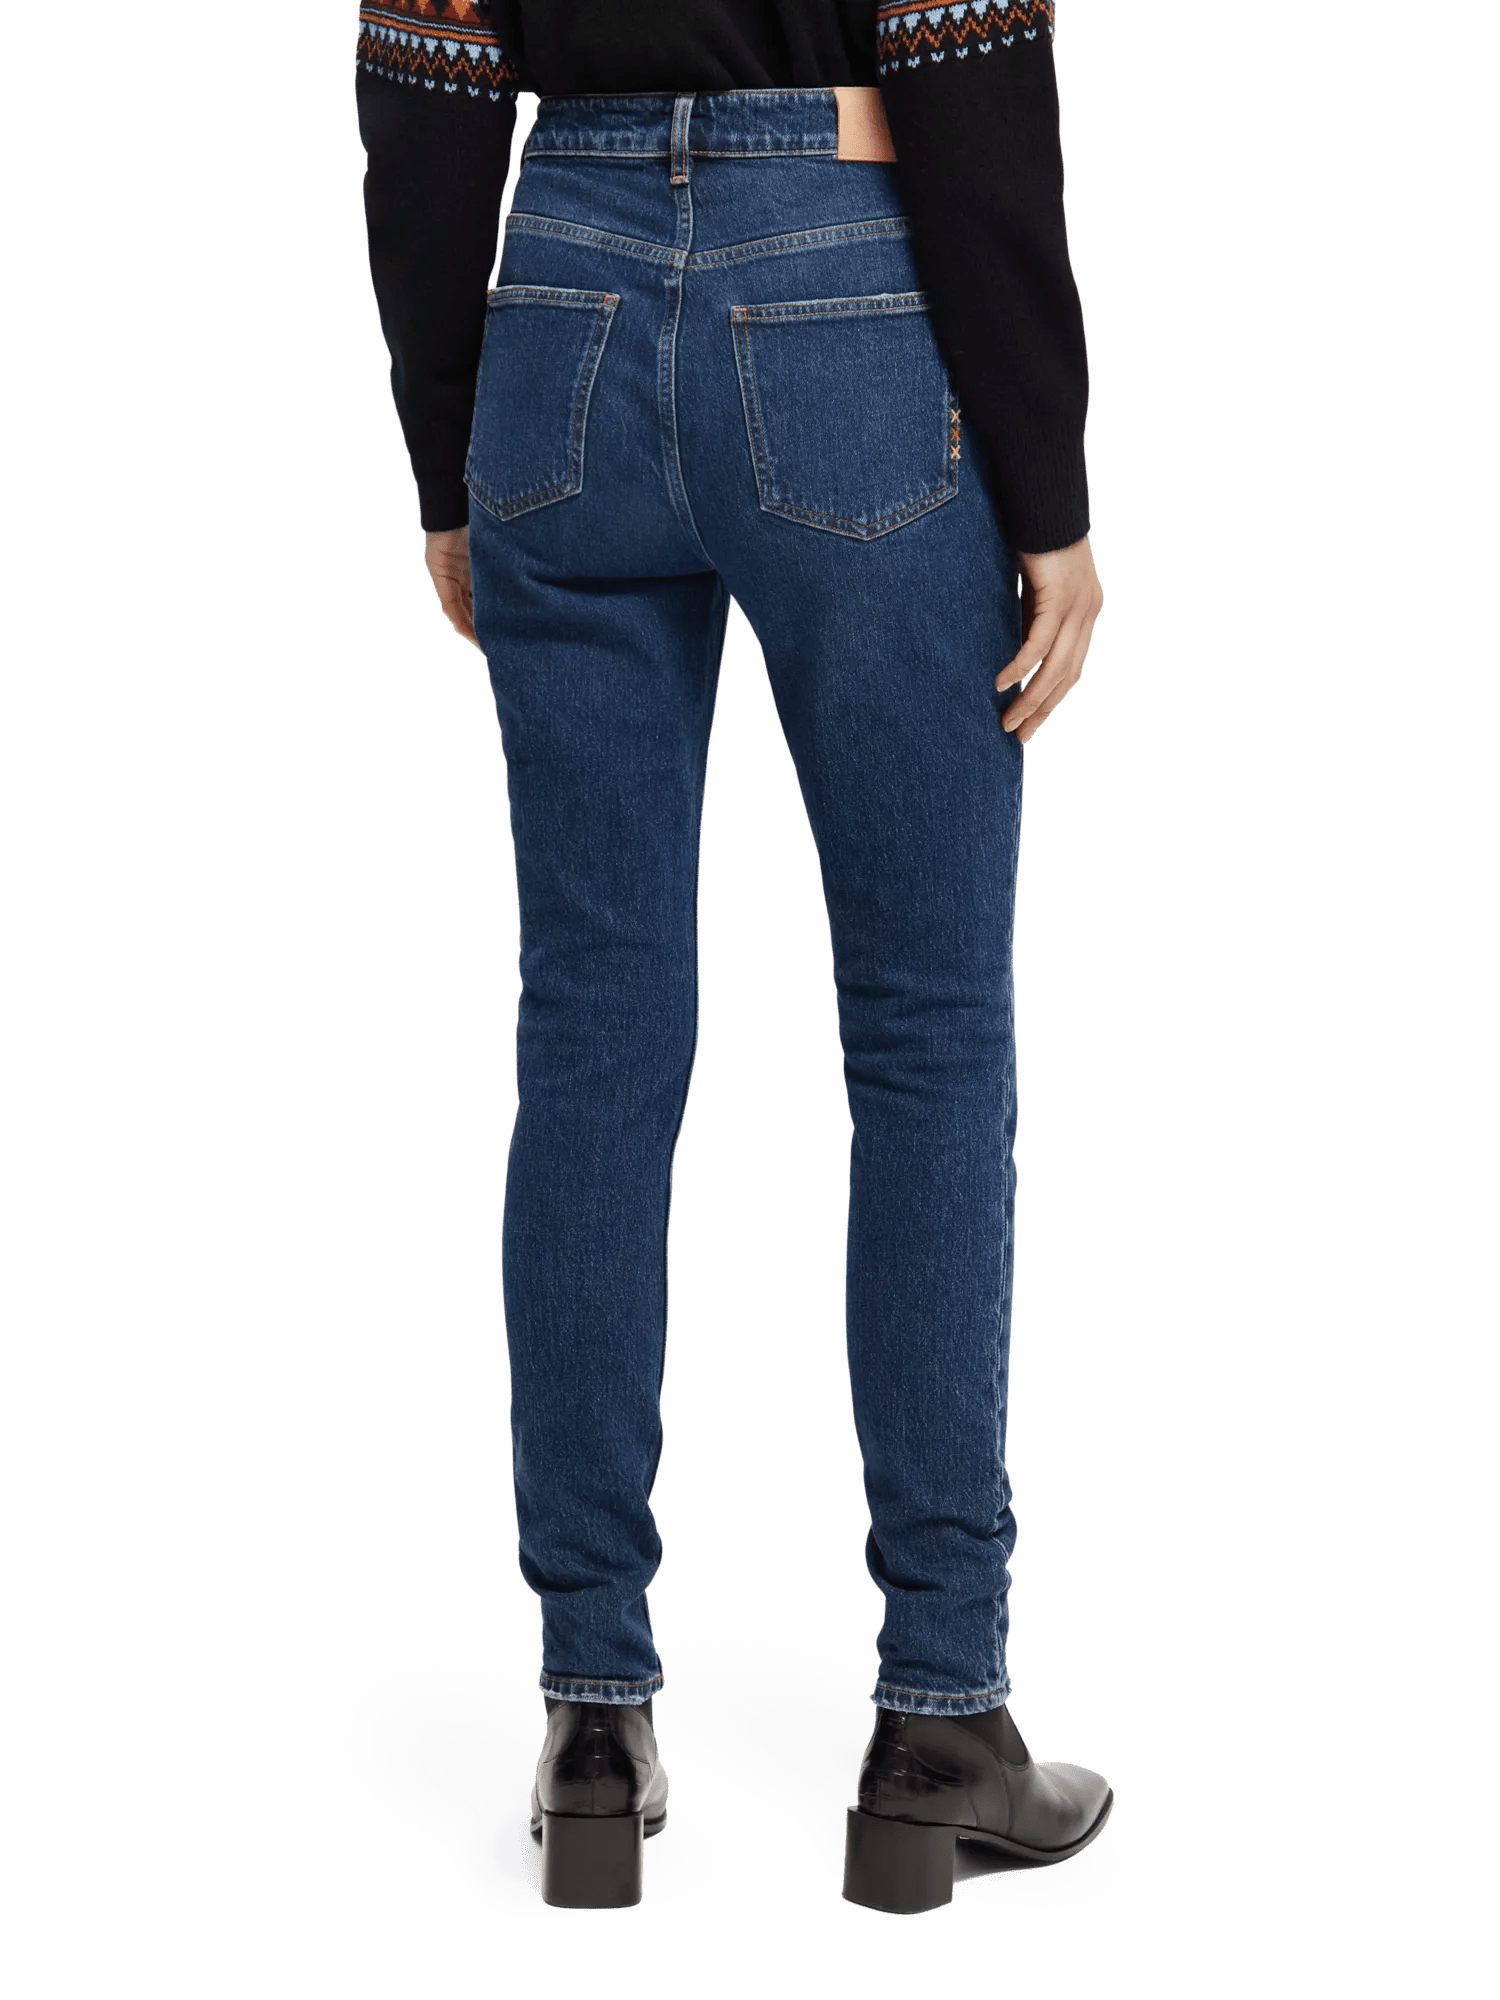 Scotch & Soda The Line high-rise skinny fit jeans NHD-BCK